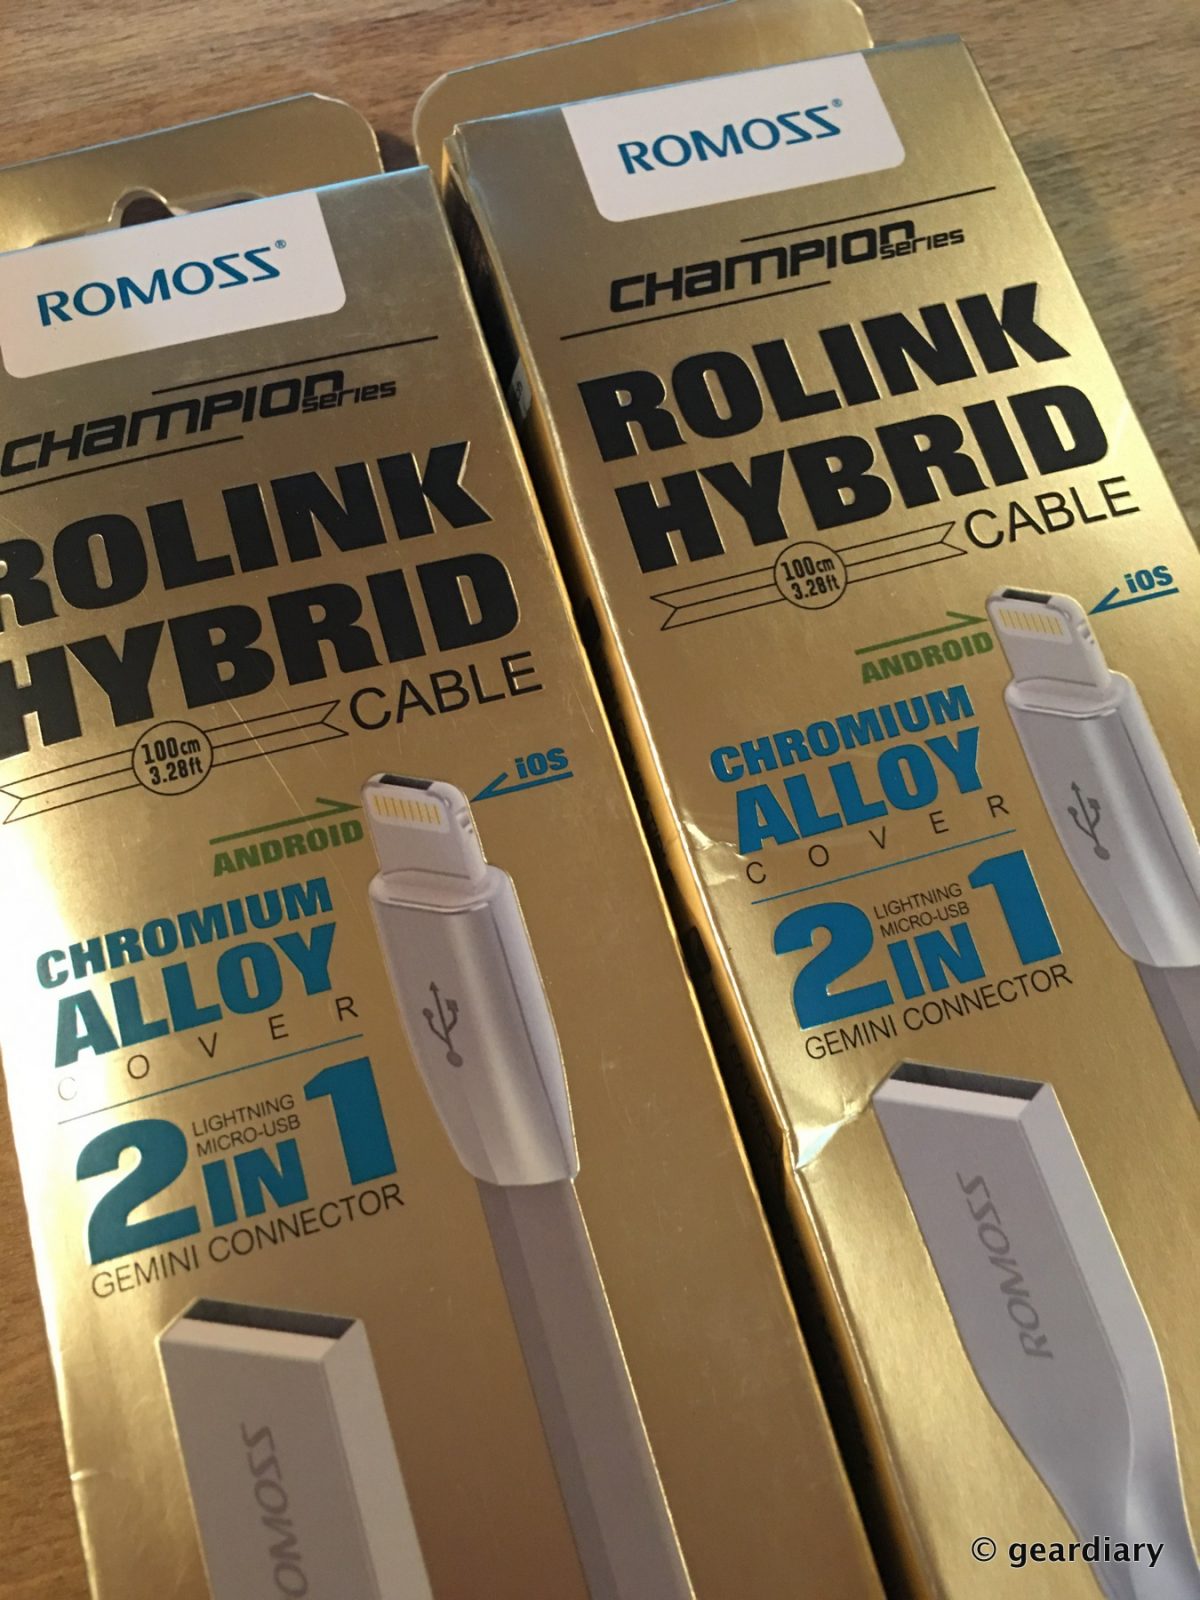 ROMOSS Rolink Hybrid Cable: One Cable with a Flippable End for MicroUSB or Lightning. What?!